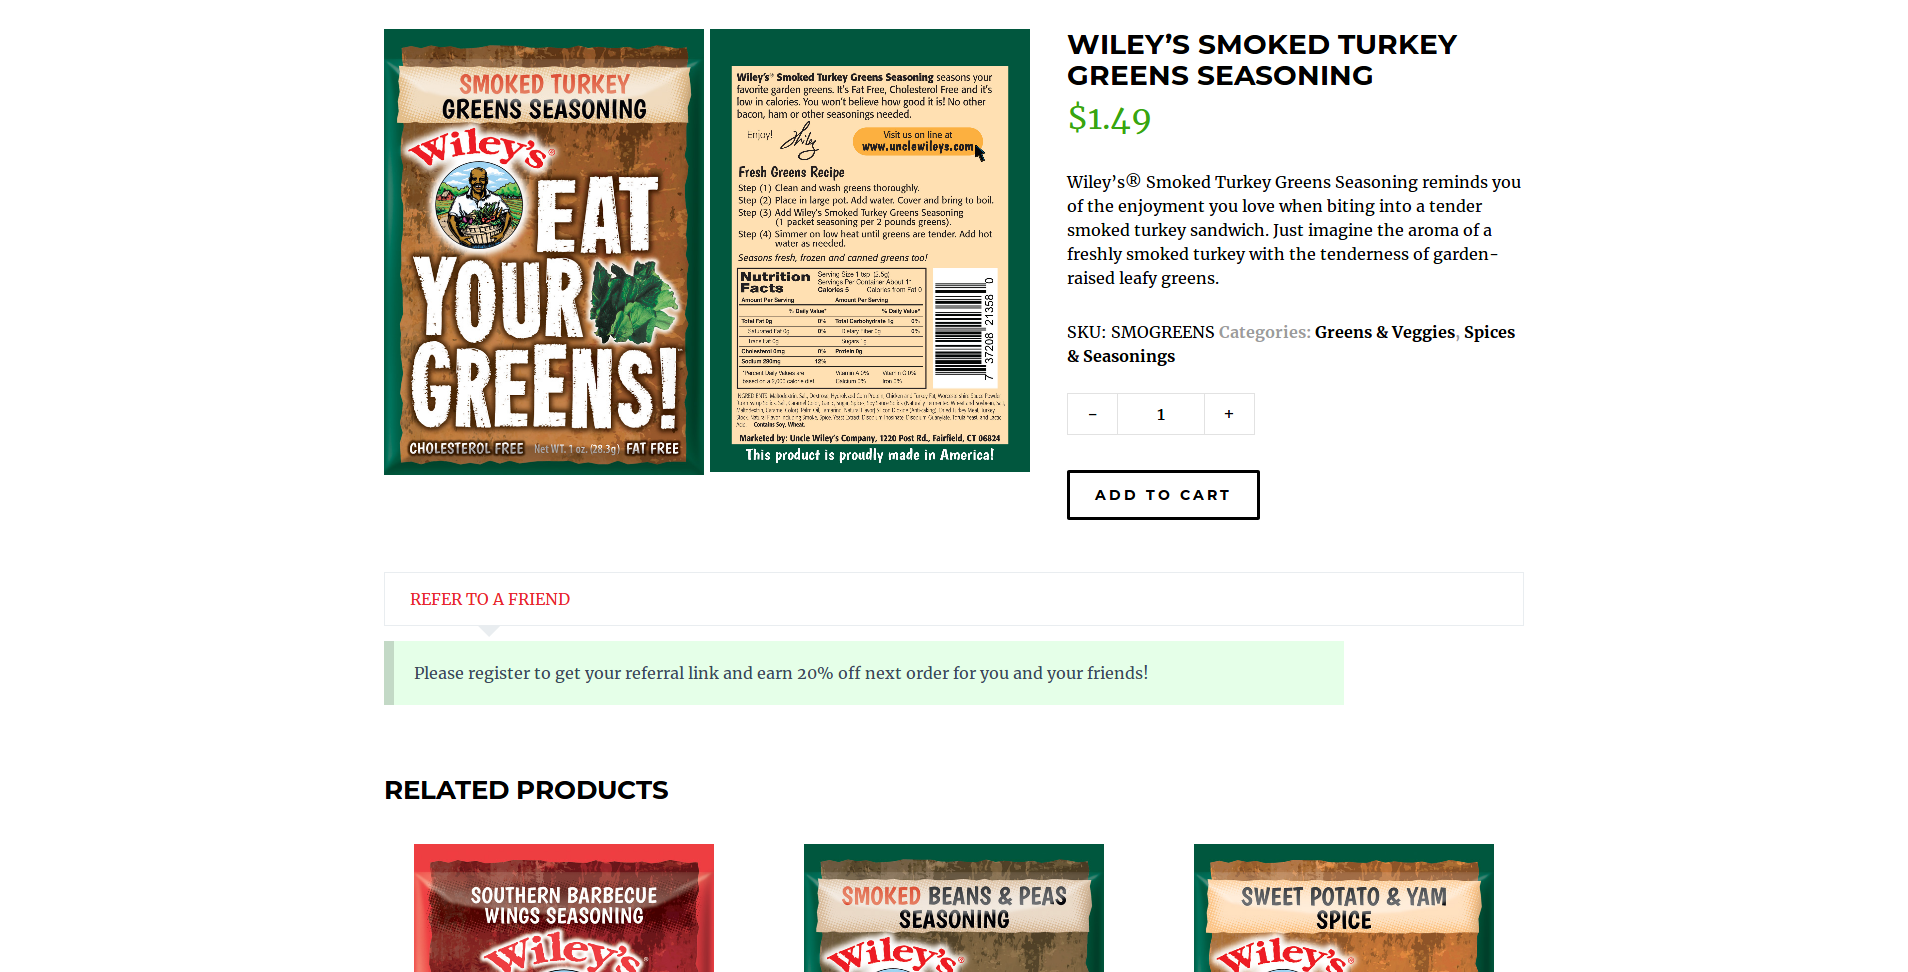 https://indie.systems/wp-content/uploads/2018/07/Screenshot_2018-07-24-Wiley%E2%80%99s-Smoked-Turkey-Greens-Seasoning-Uncle-Wileys-Southern-Spices-Seasonings.png